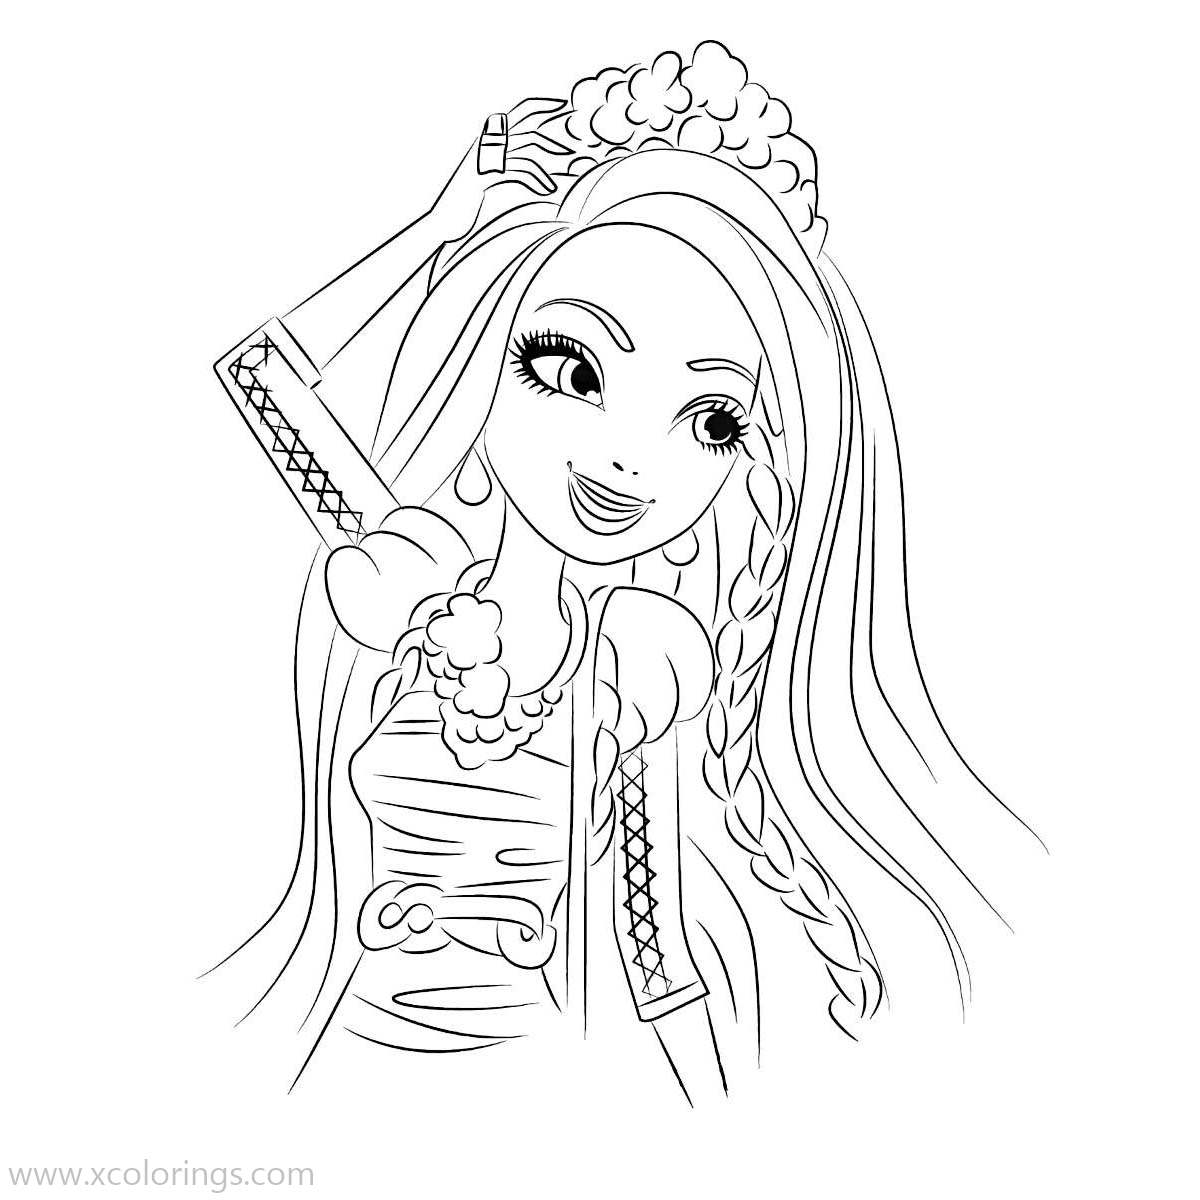 Free Ever After High Coloring Pages Smiling Girl printable